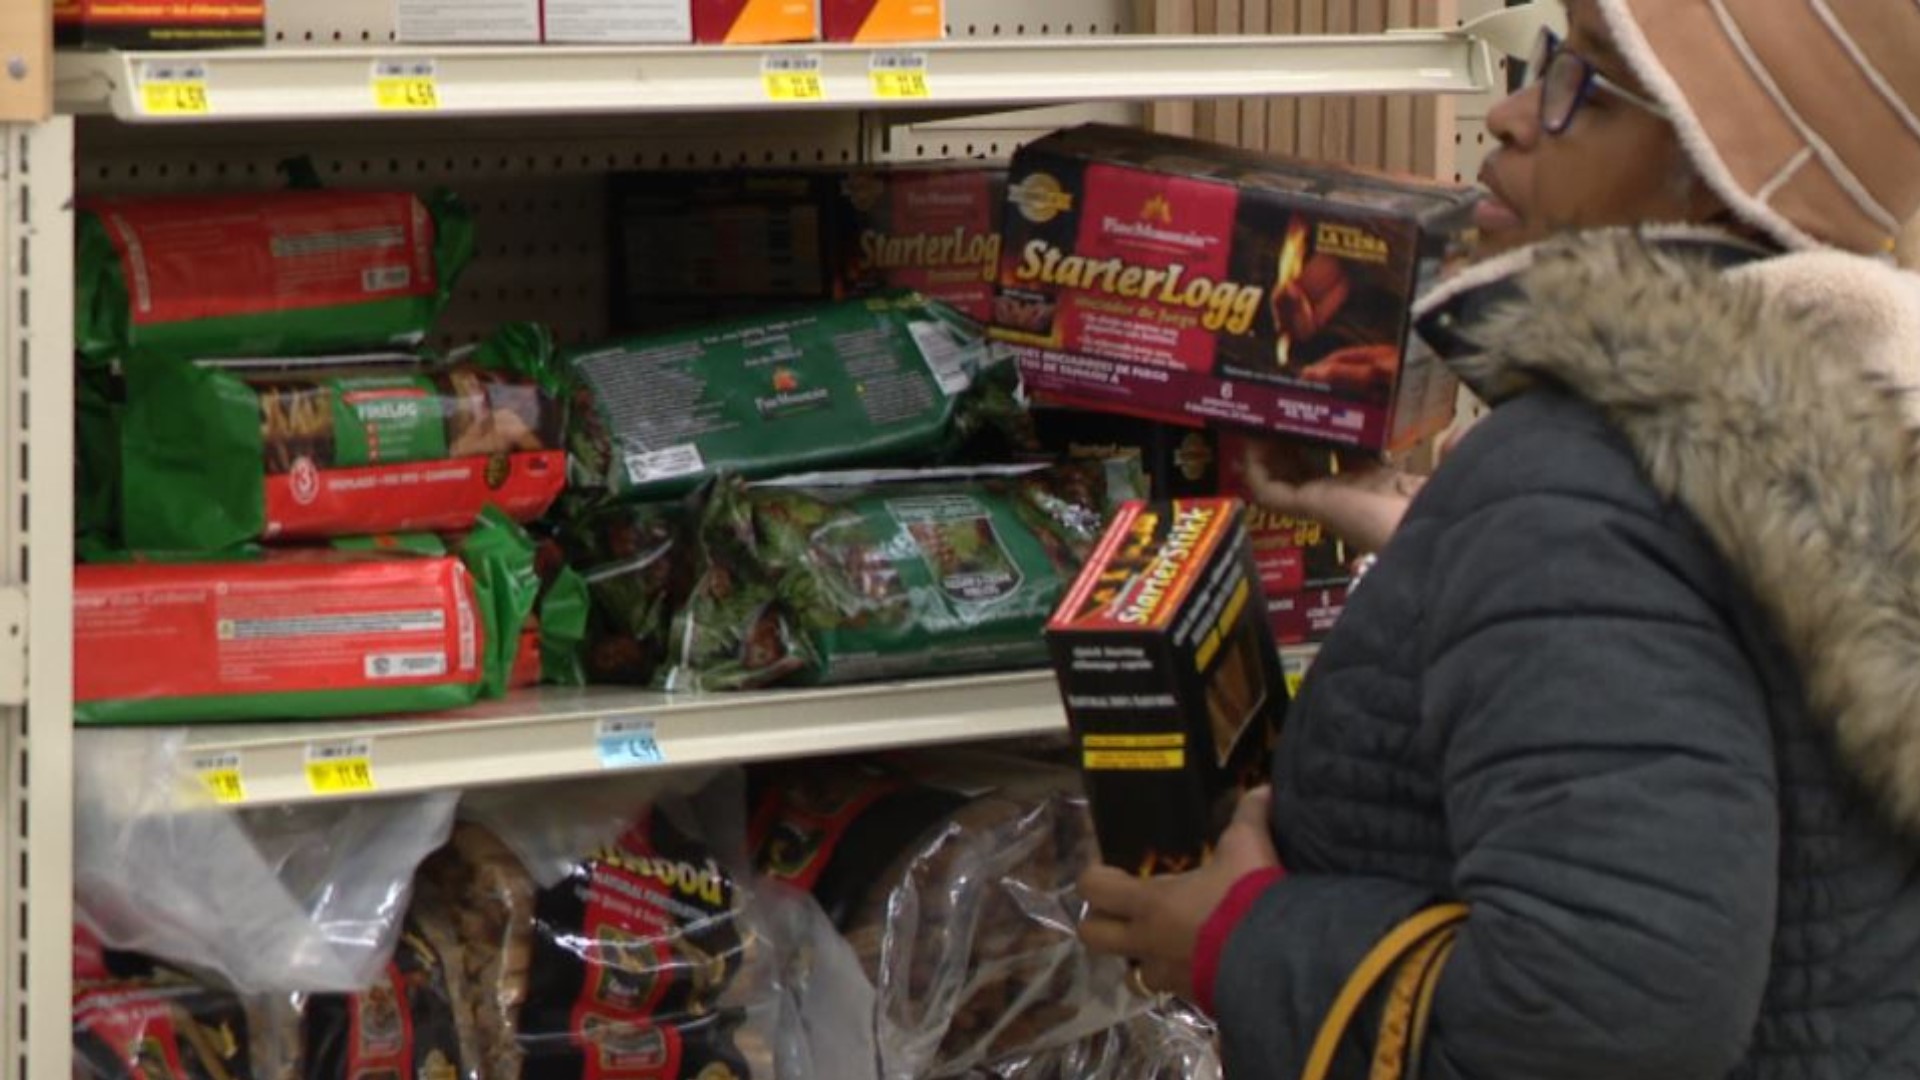 Everything you need to prepare for a winter storm was selling quickly on Saturday.